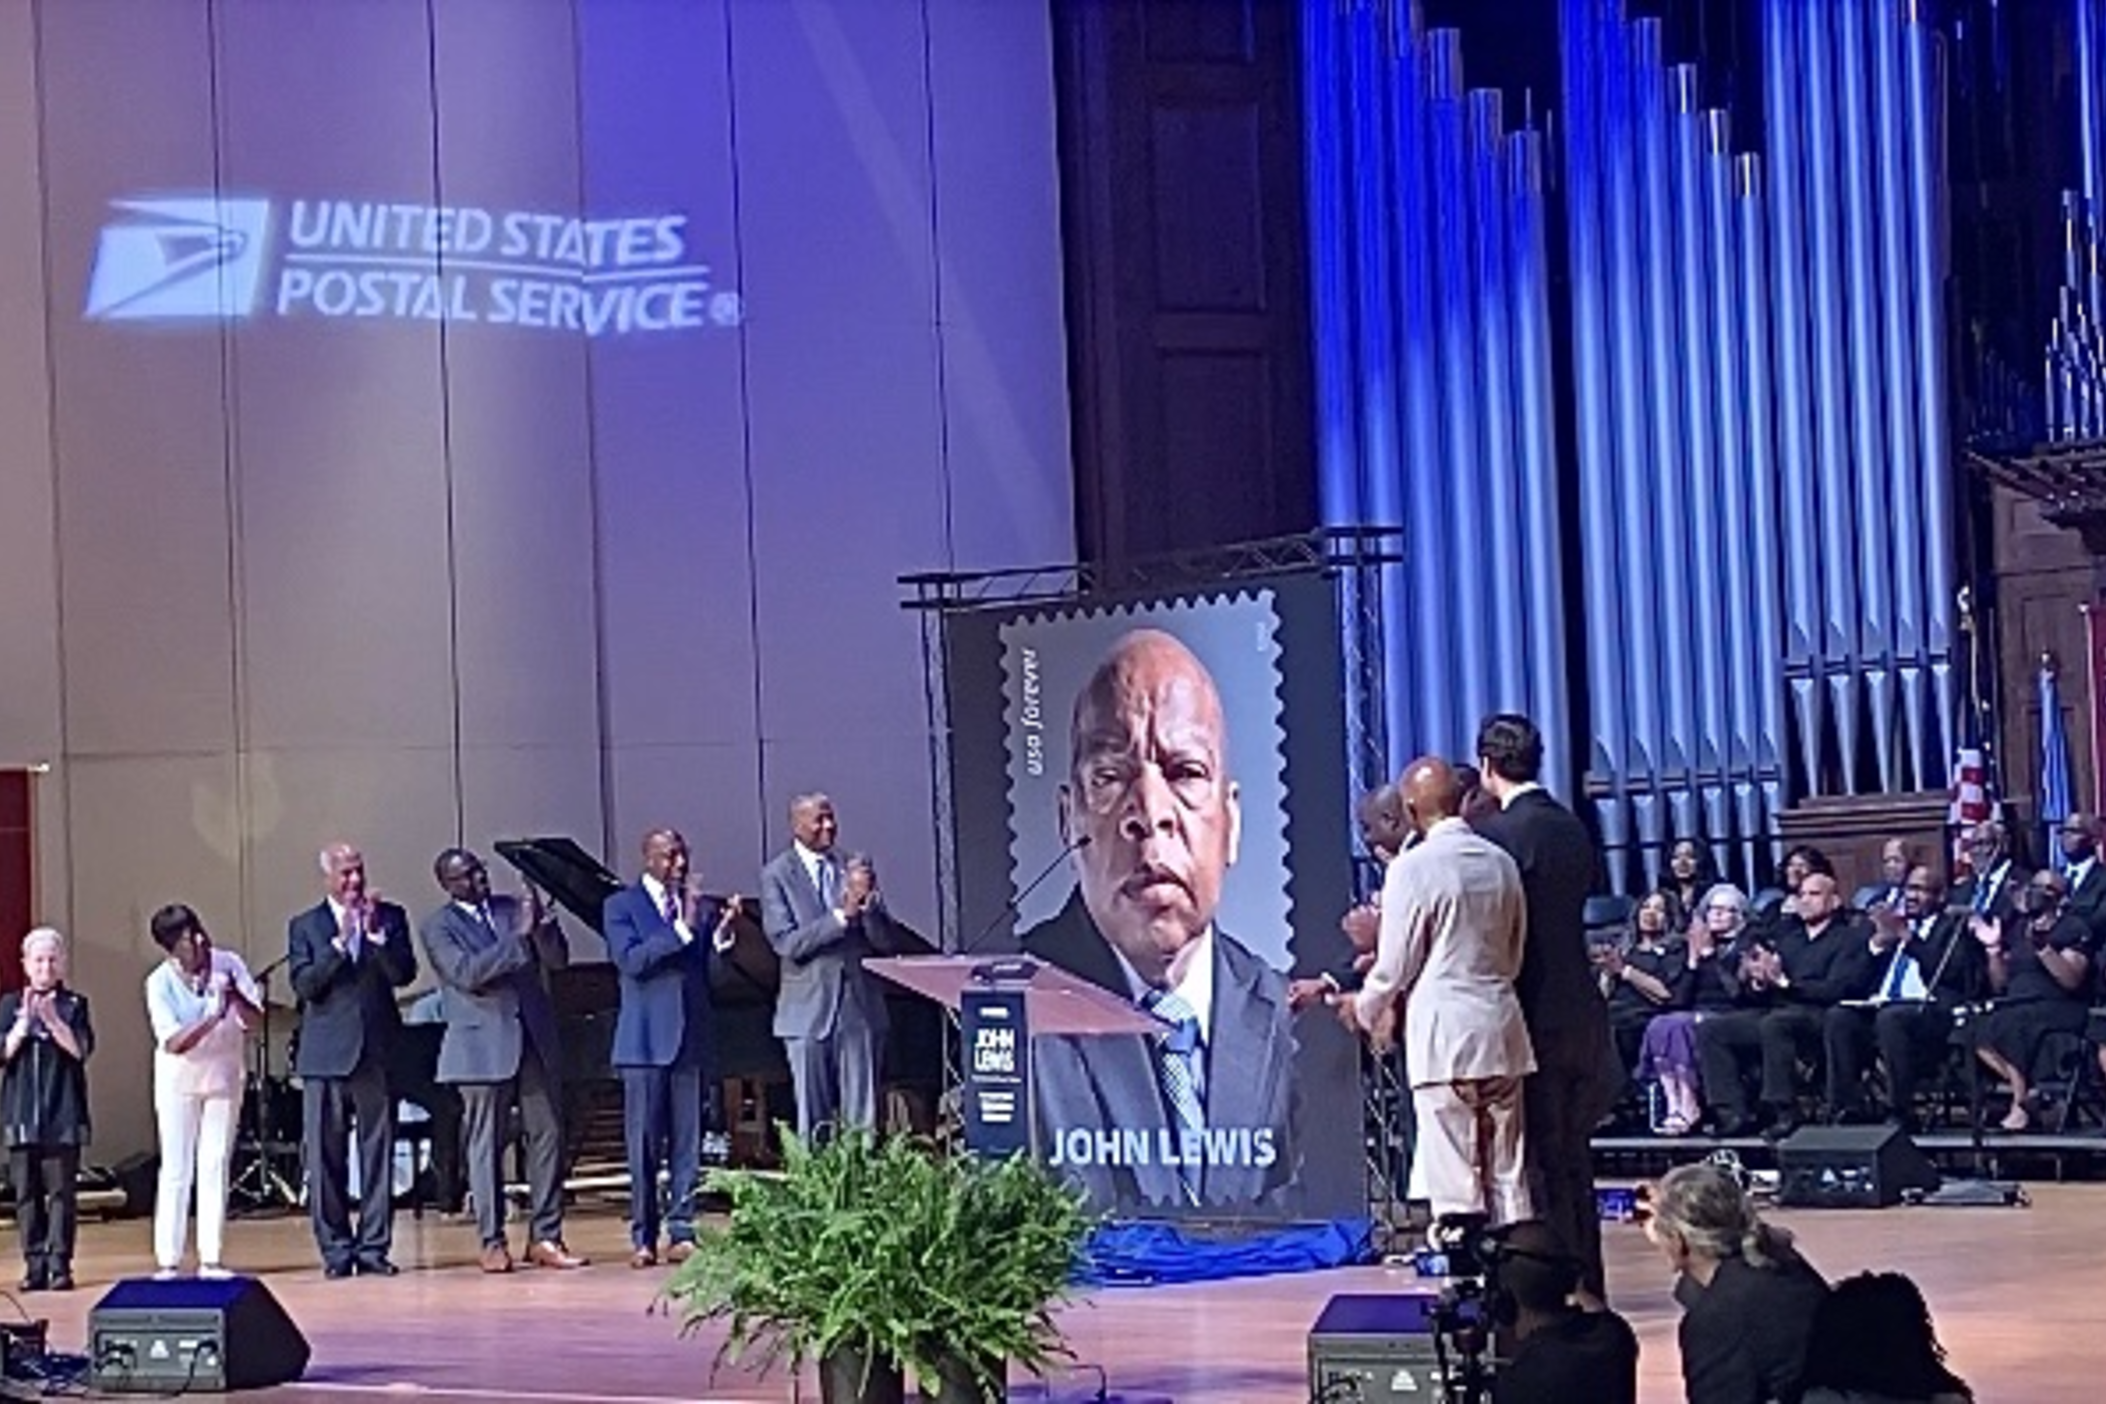 The John Lewis 'forever' stamp is unveiled at Morehouse College in Atlanta on July 21, 2023 at an event hosted by the U.S. Postal Service.